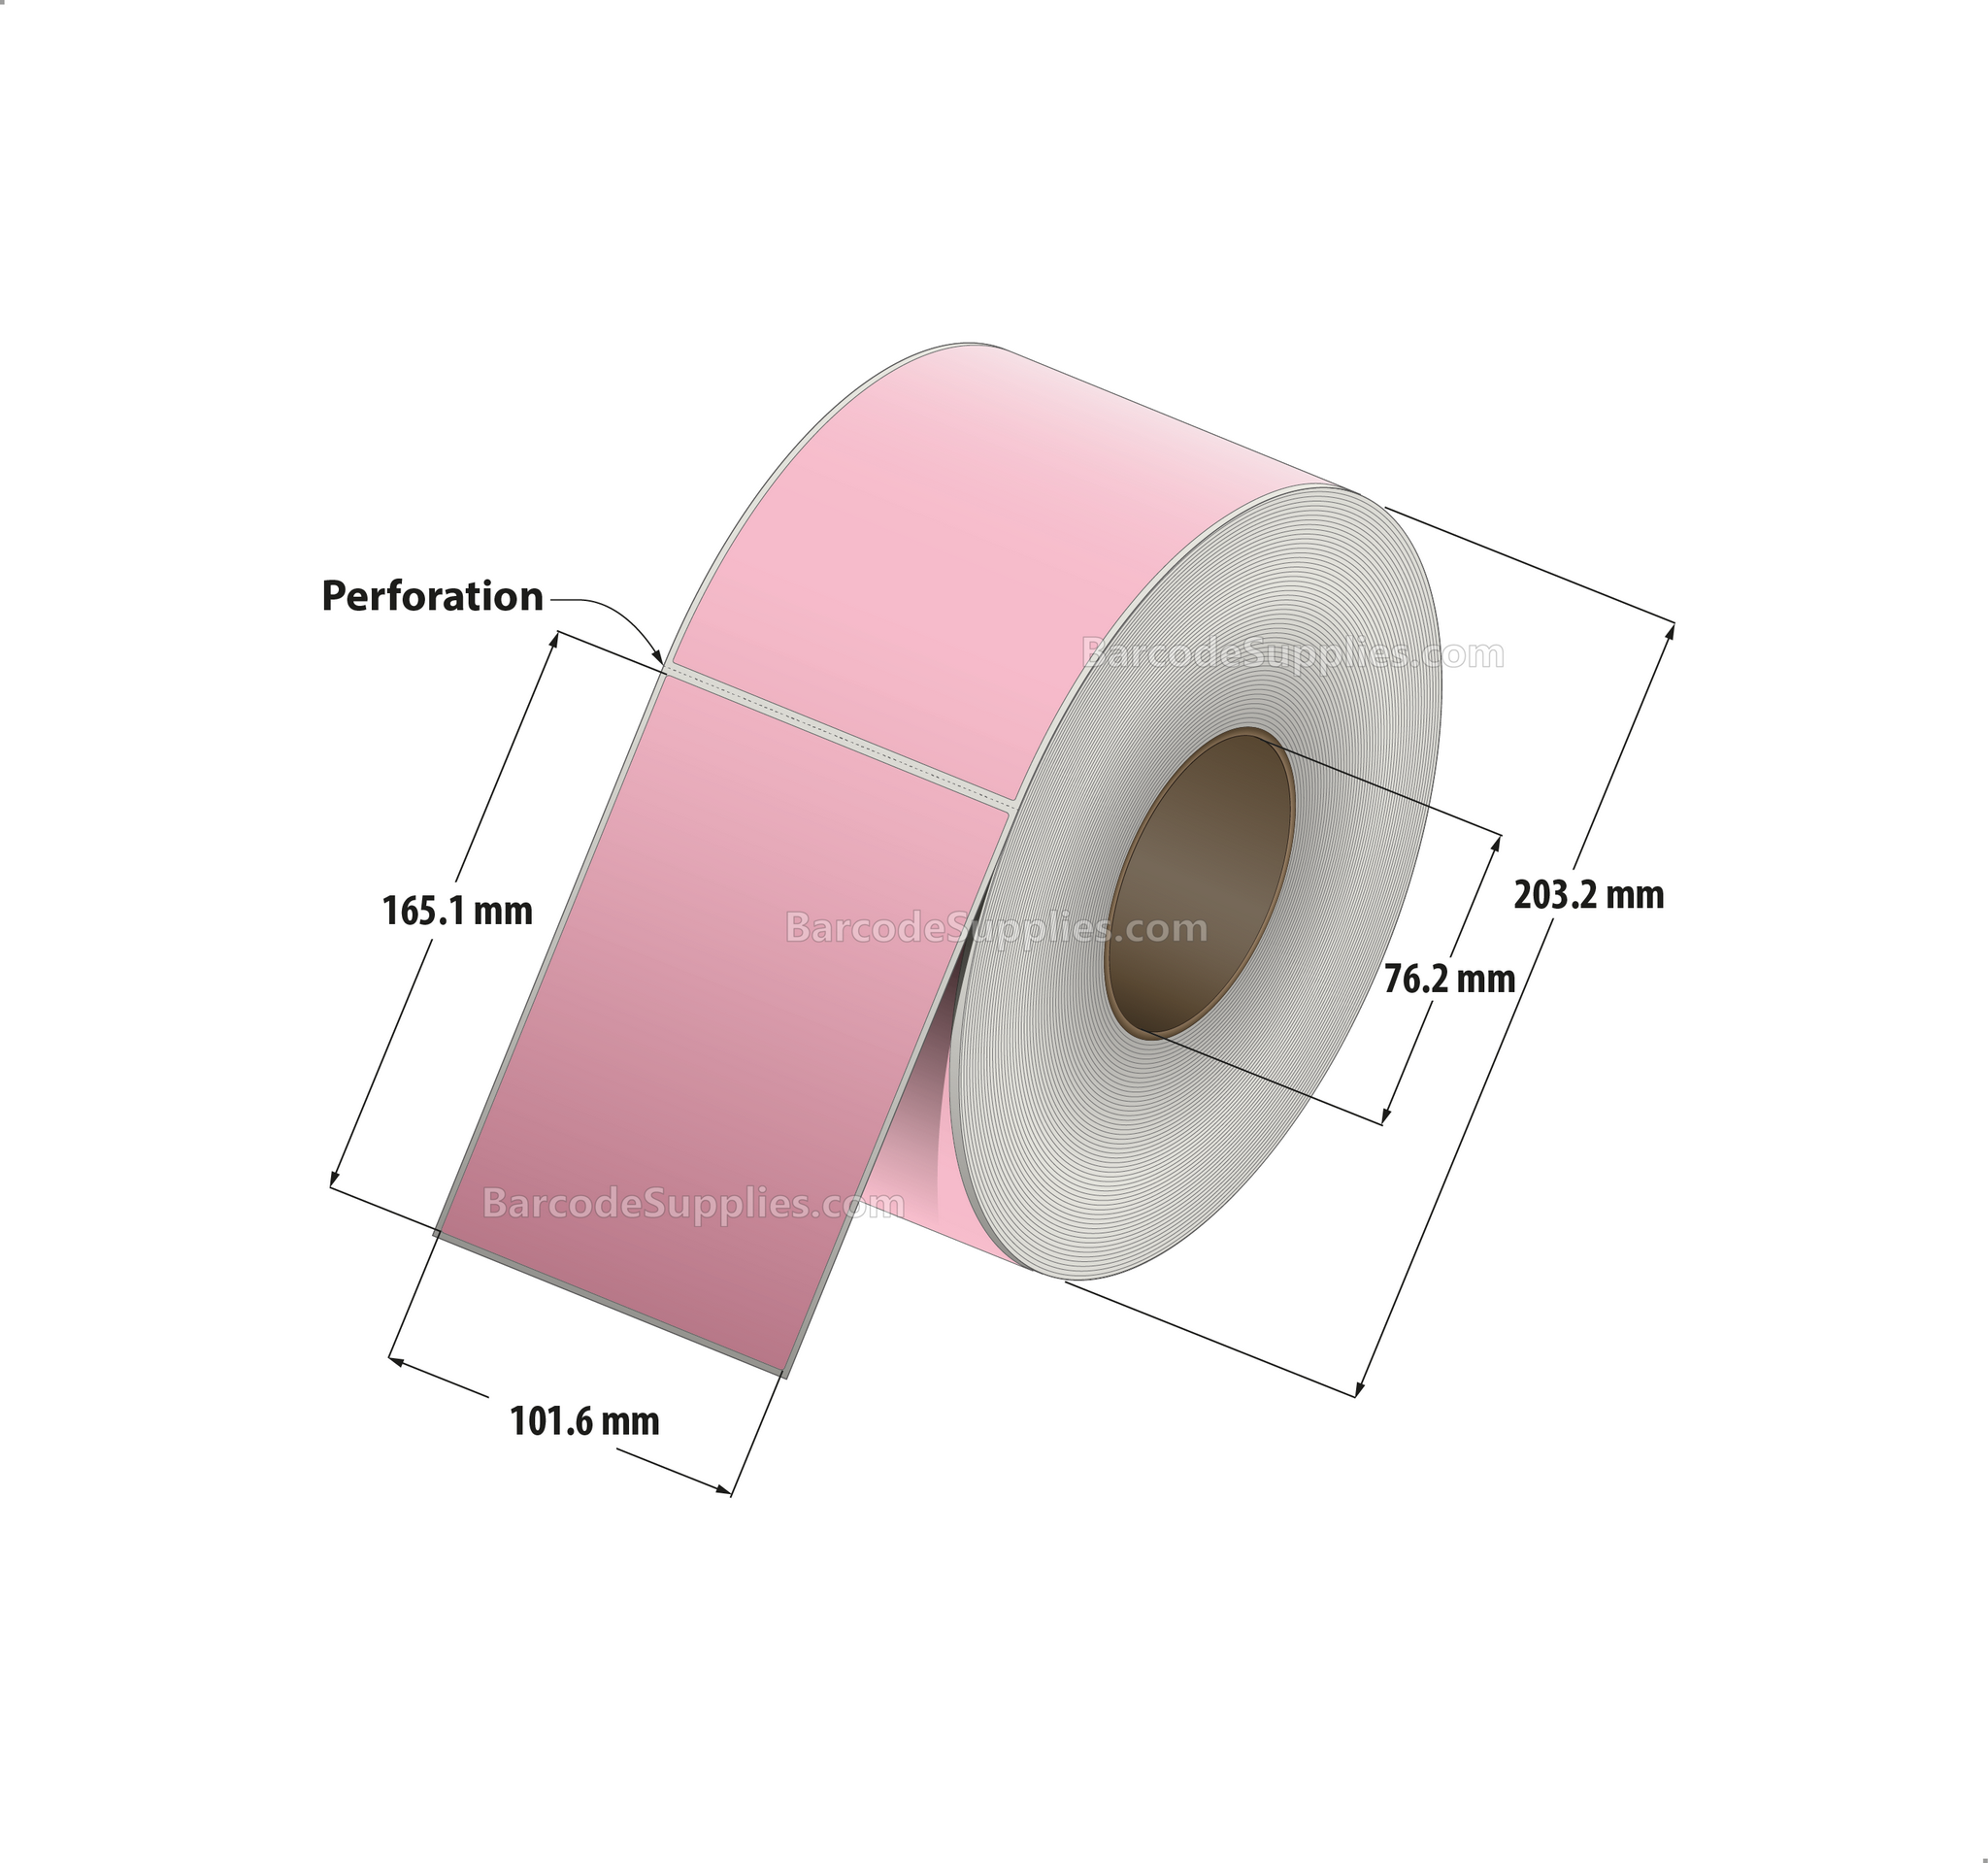 4 x 6.5 Thermal Transfer 196 Pink Labels With Permanent Acrylic Adhesive - Perforated - 900 Labels Per Roll - Carton Of 4 Rolls - 3600 Labels Total - MPN: TH465-1PP